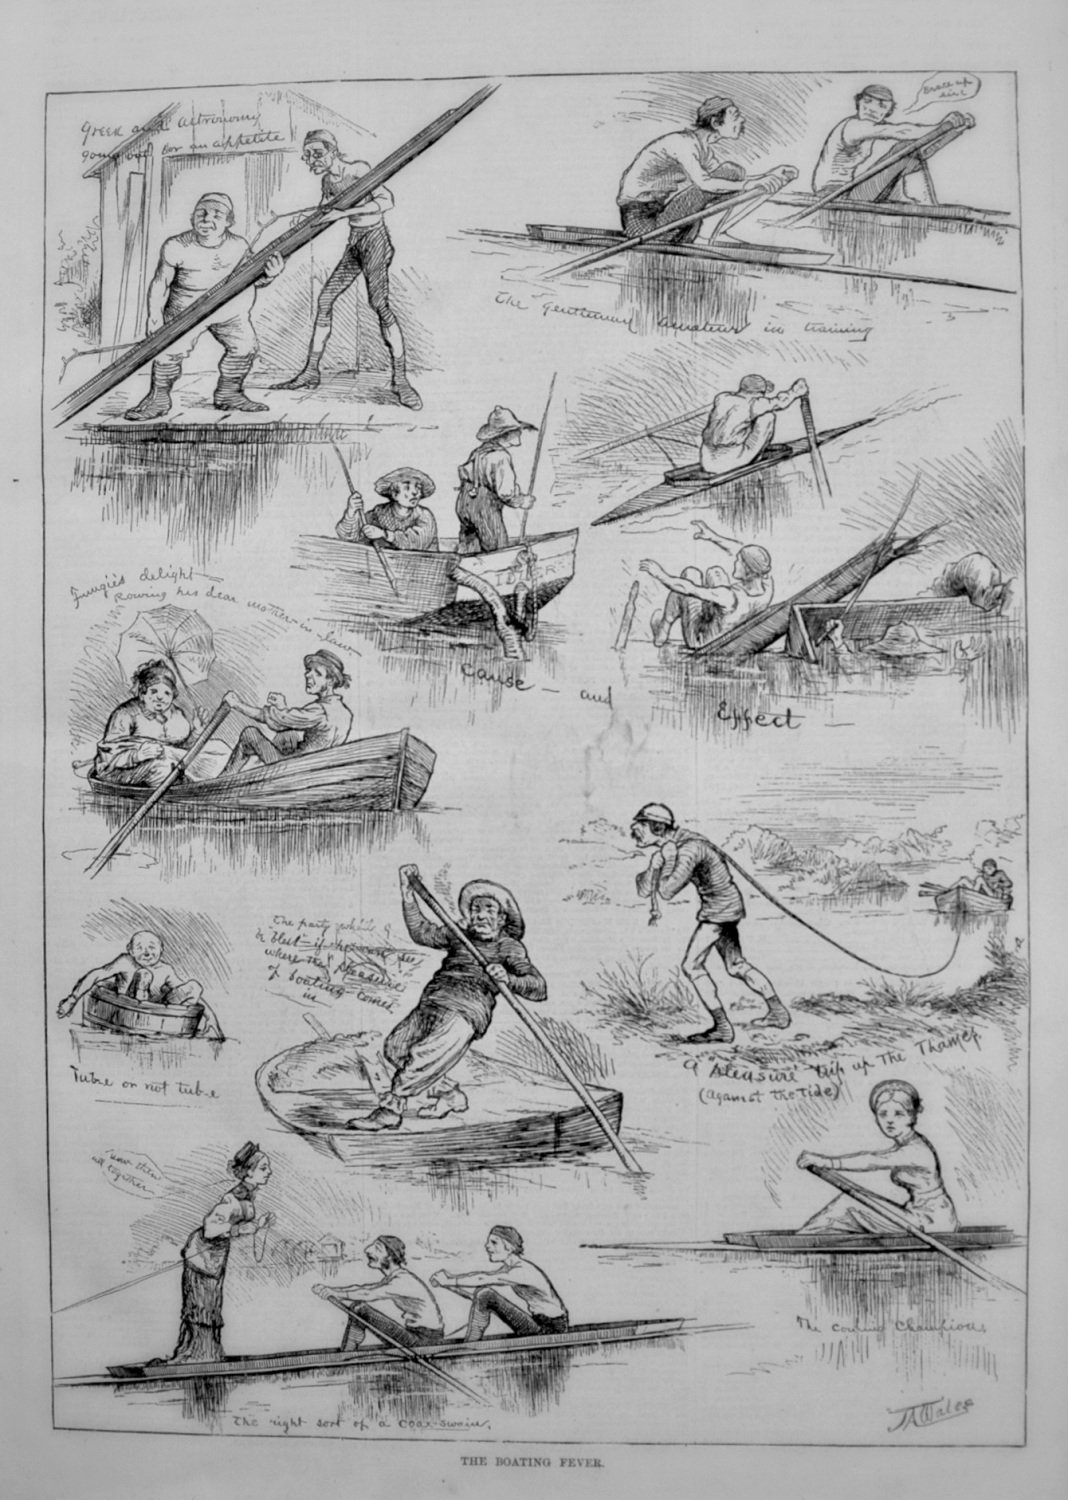 The Boating Fever. 1876